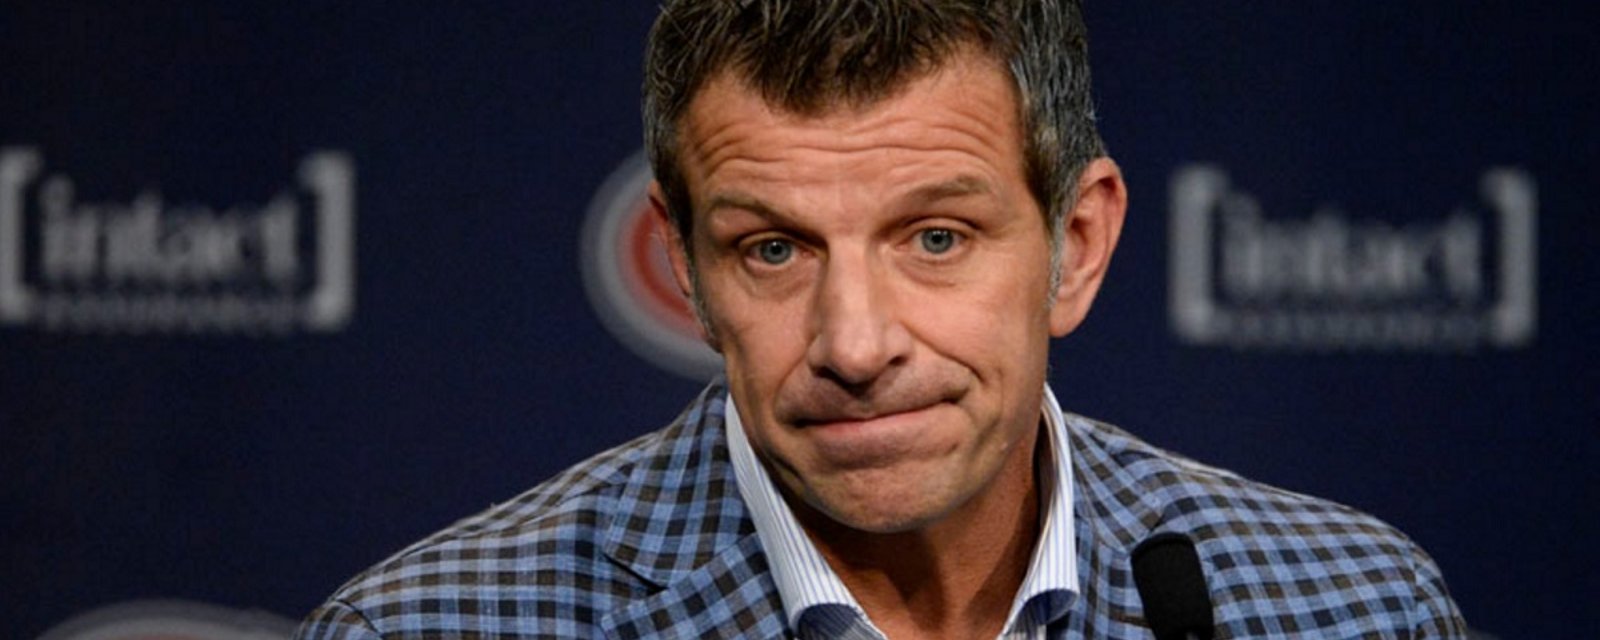 Habs GM Marc Bergevin puts an end to the Alex Galchenyuk experiment. 